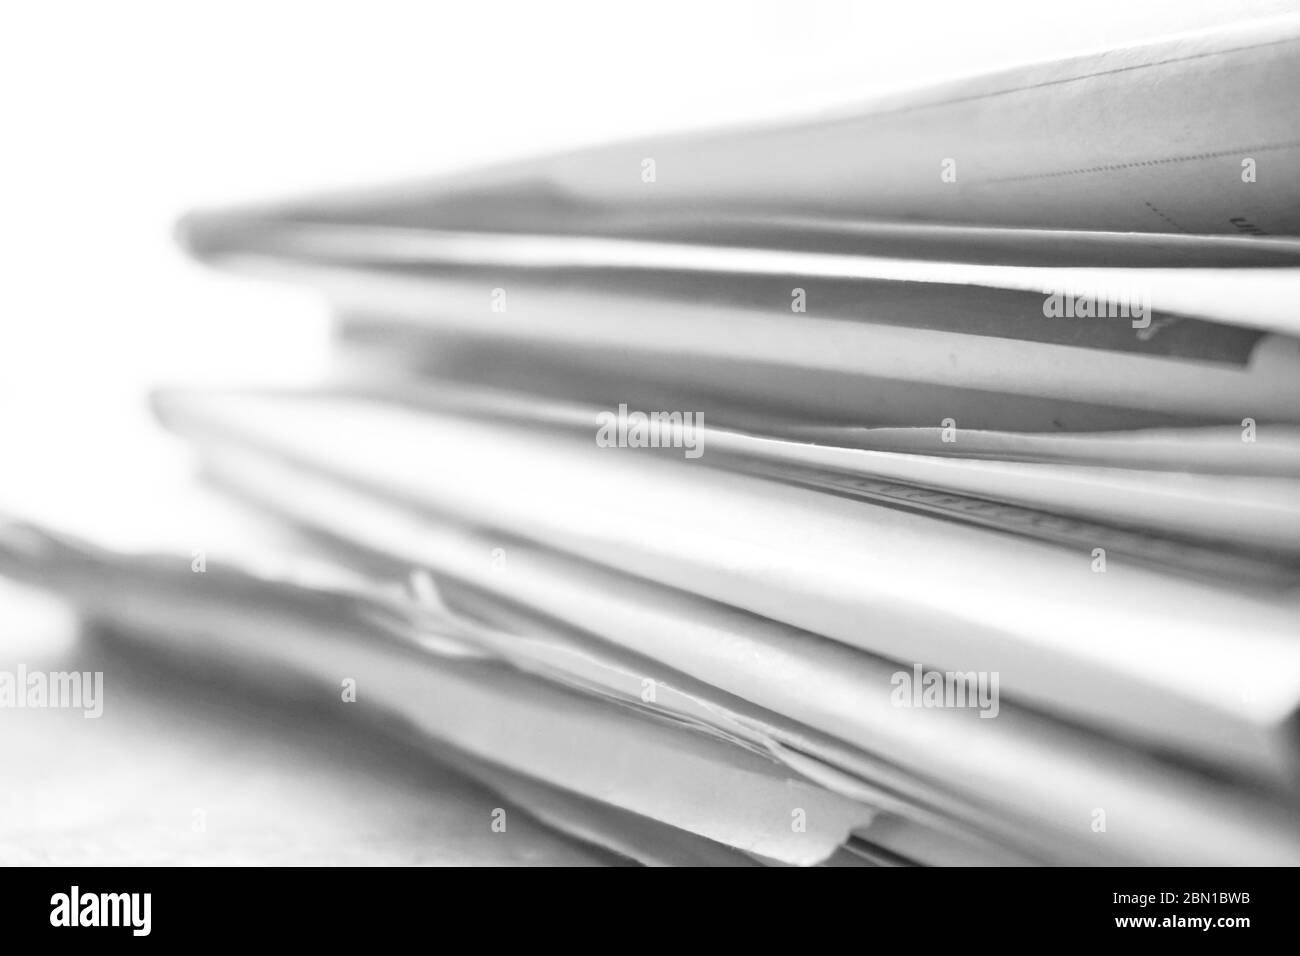 rolled up newspaper stack background Stock Photo